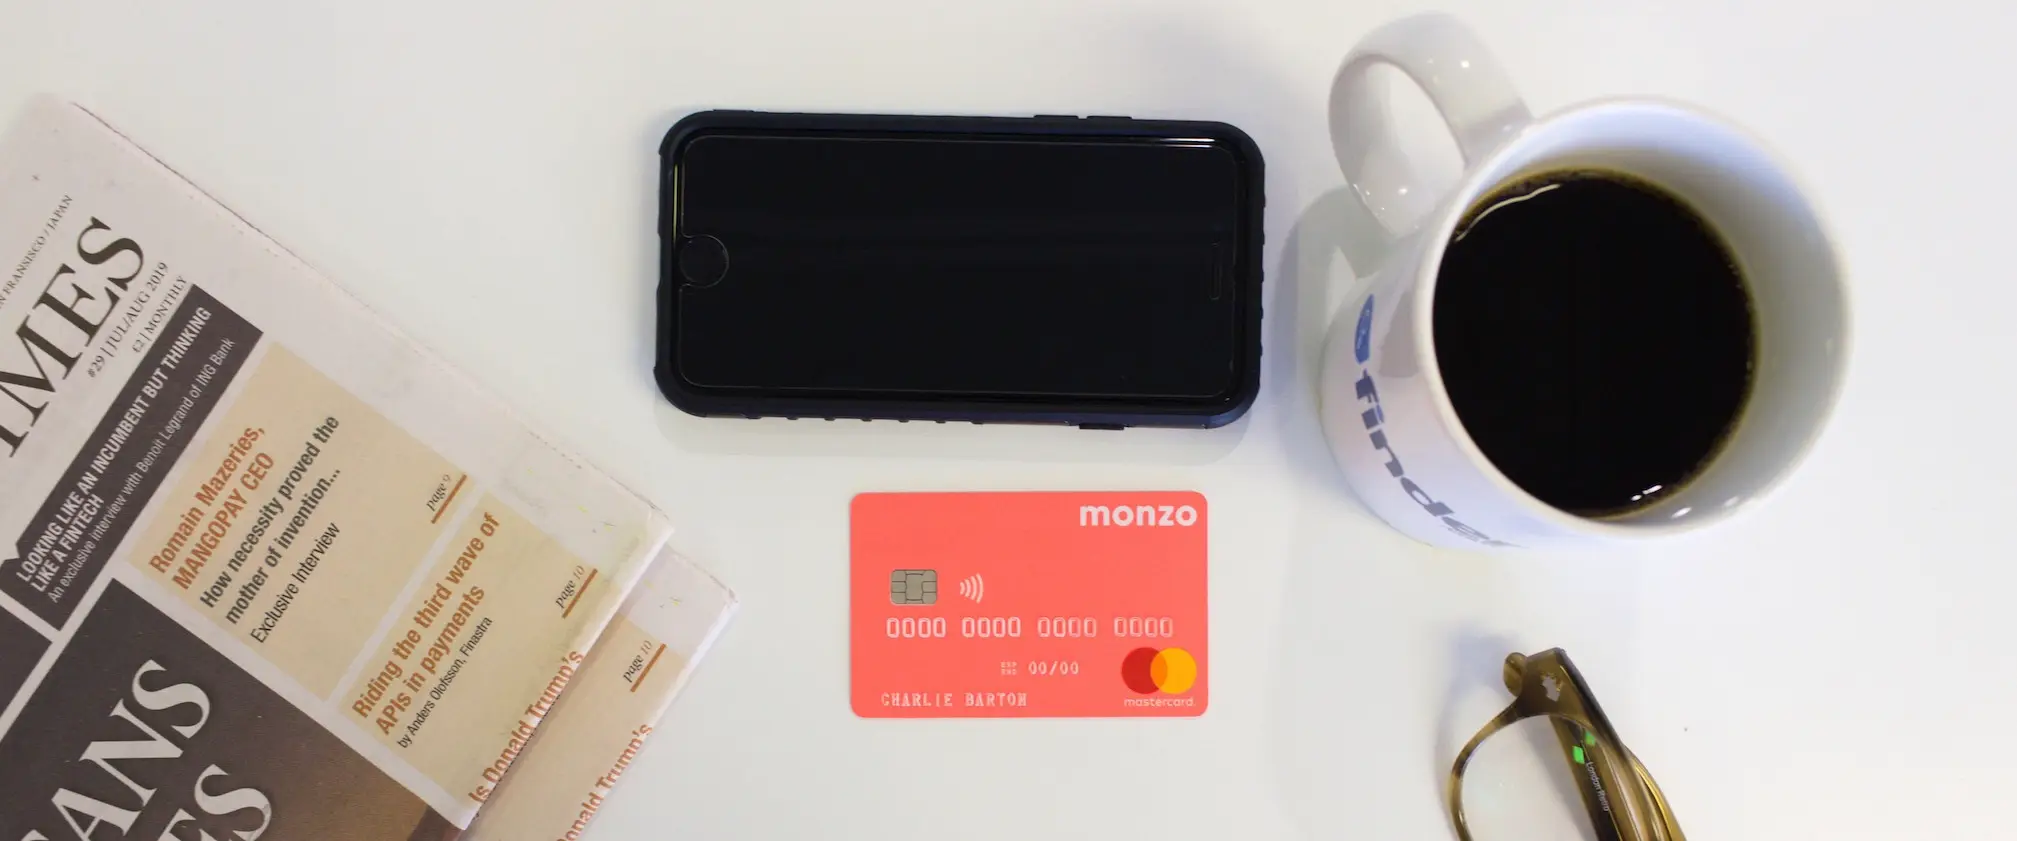 Monzo card on desk with newspaper